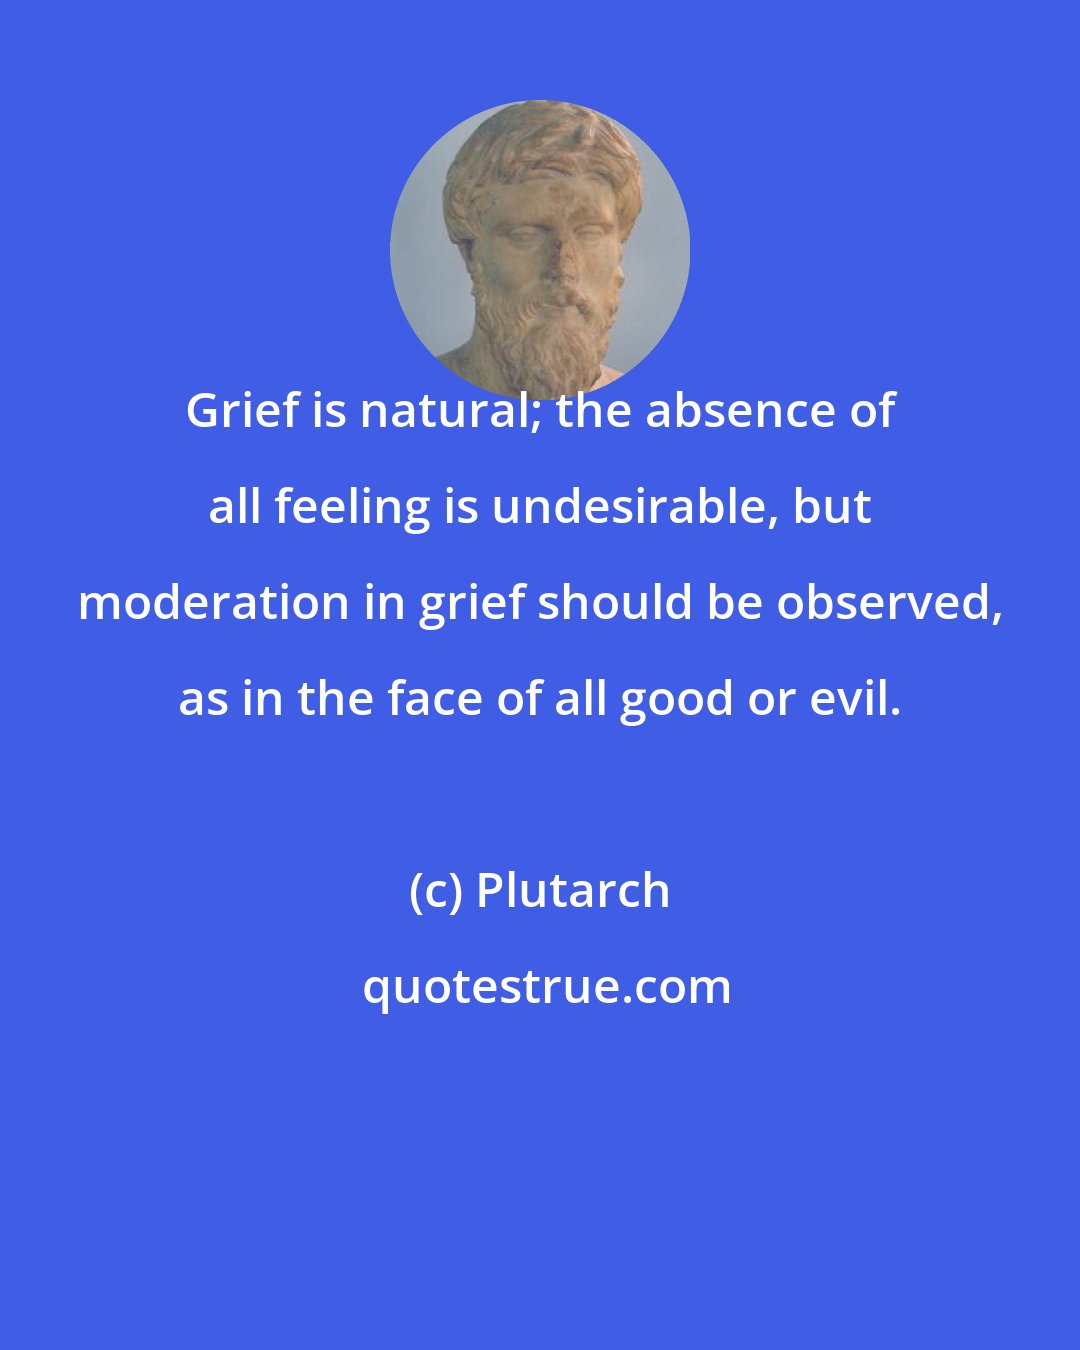 Plutarch: Grief is natural; the absence of all feeling is undesirable, but moderation in grief should be observed, as in the face of all good or evil.